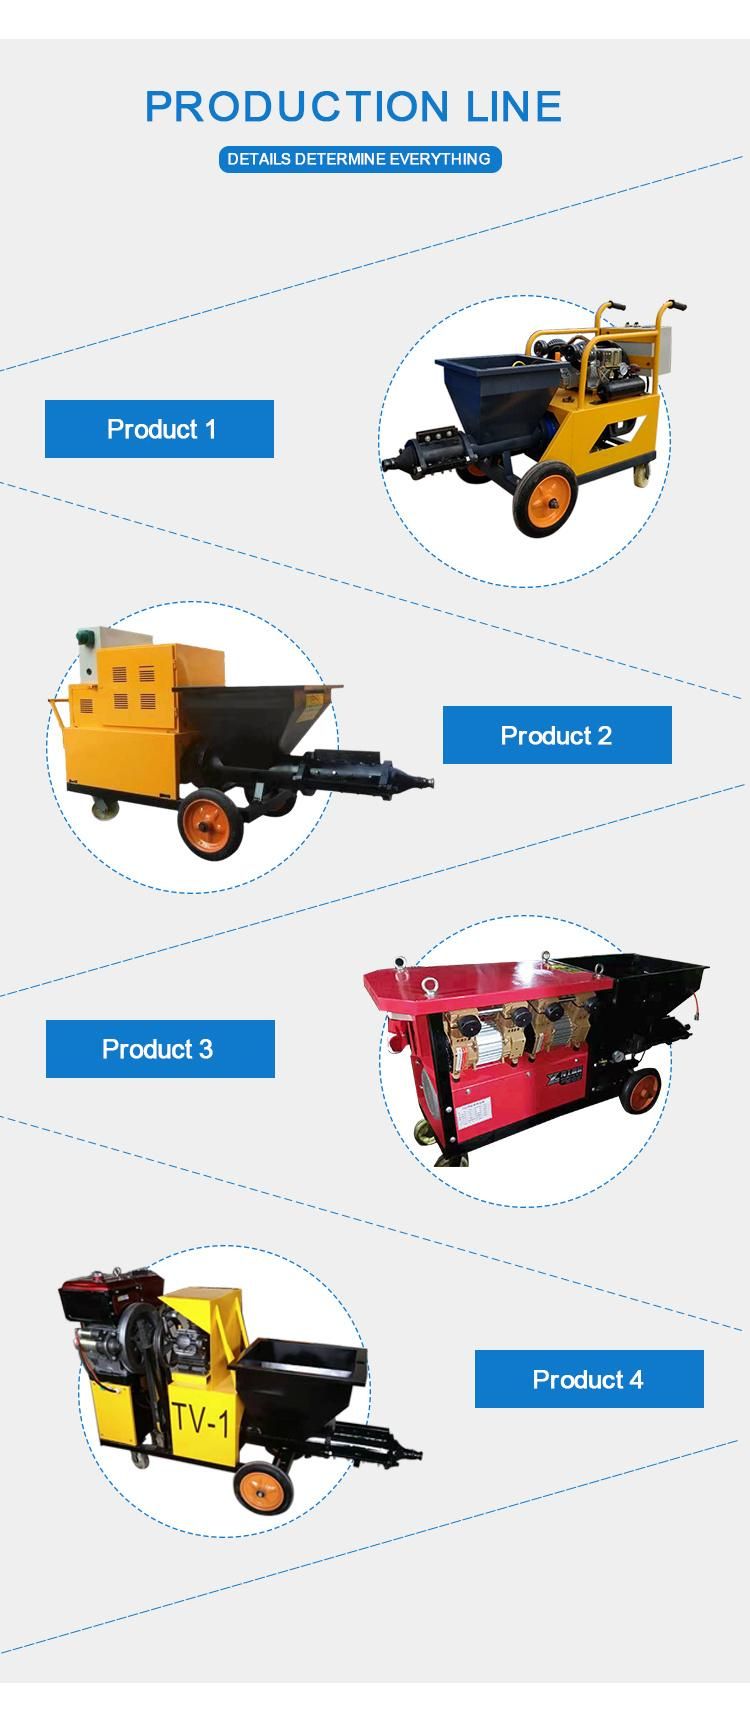 Novel Design Diesel Wall Concrete Cement Mortar Pumping and Spraying Machine